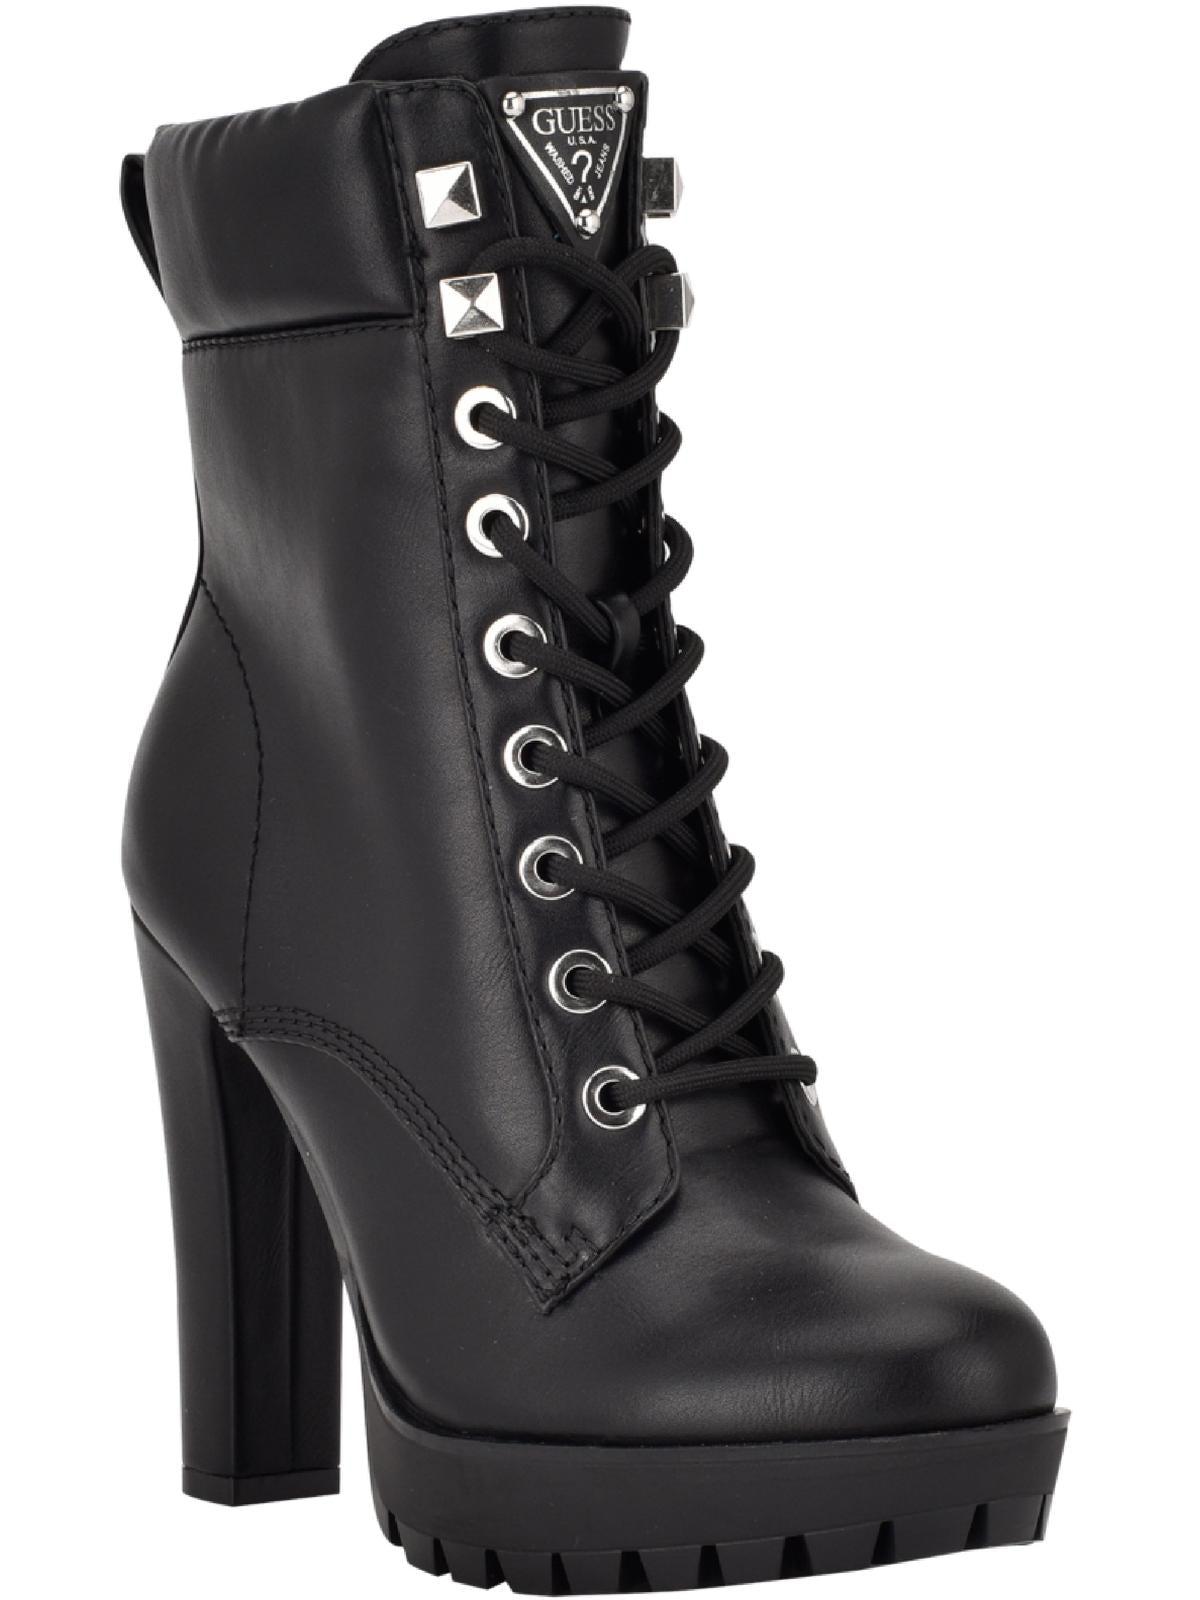 Guess Tetia Faux Leather Platform Heels Combat & Lace-up Boots in Black ...